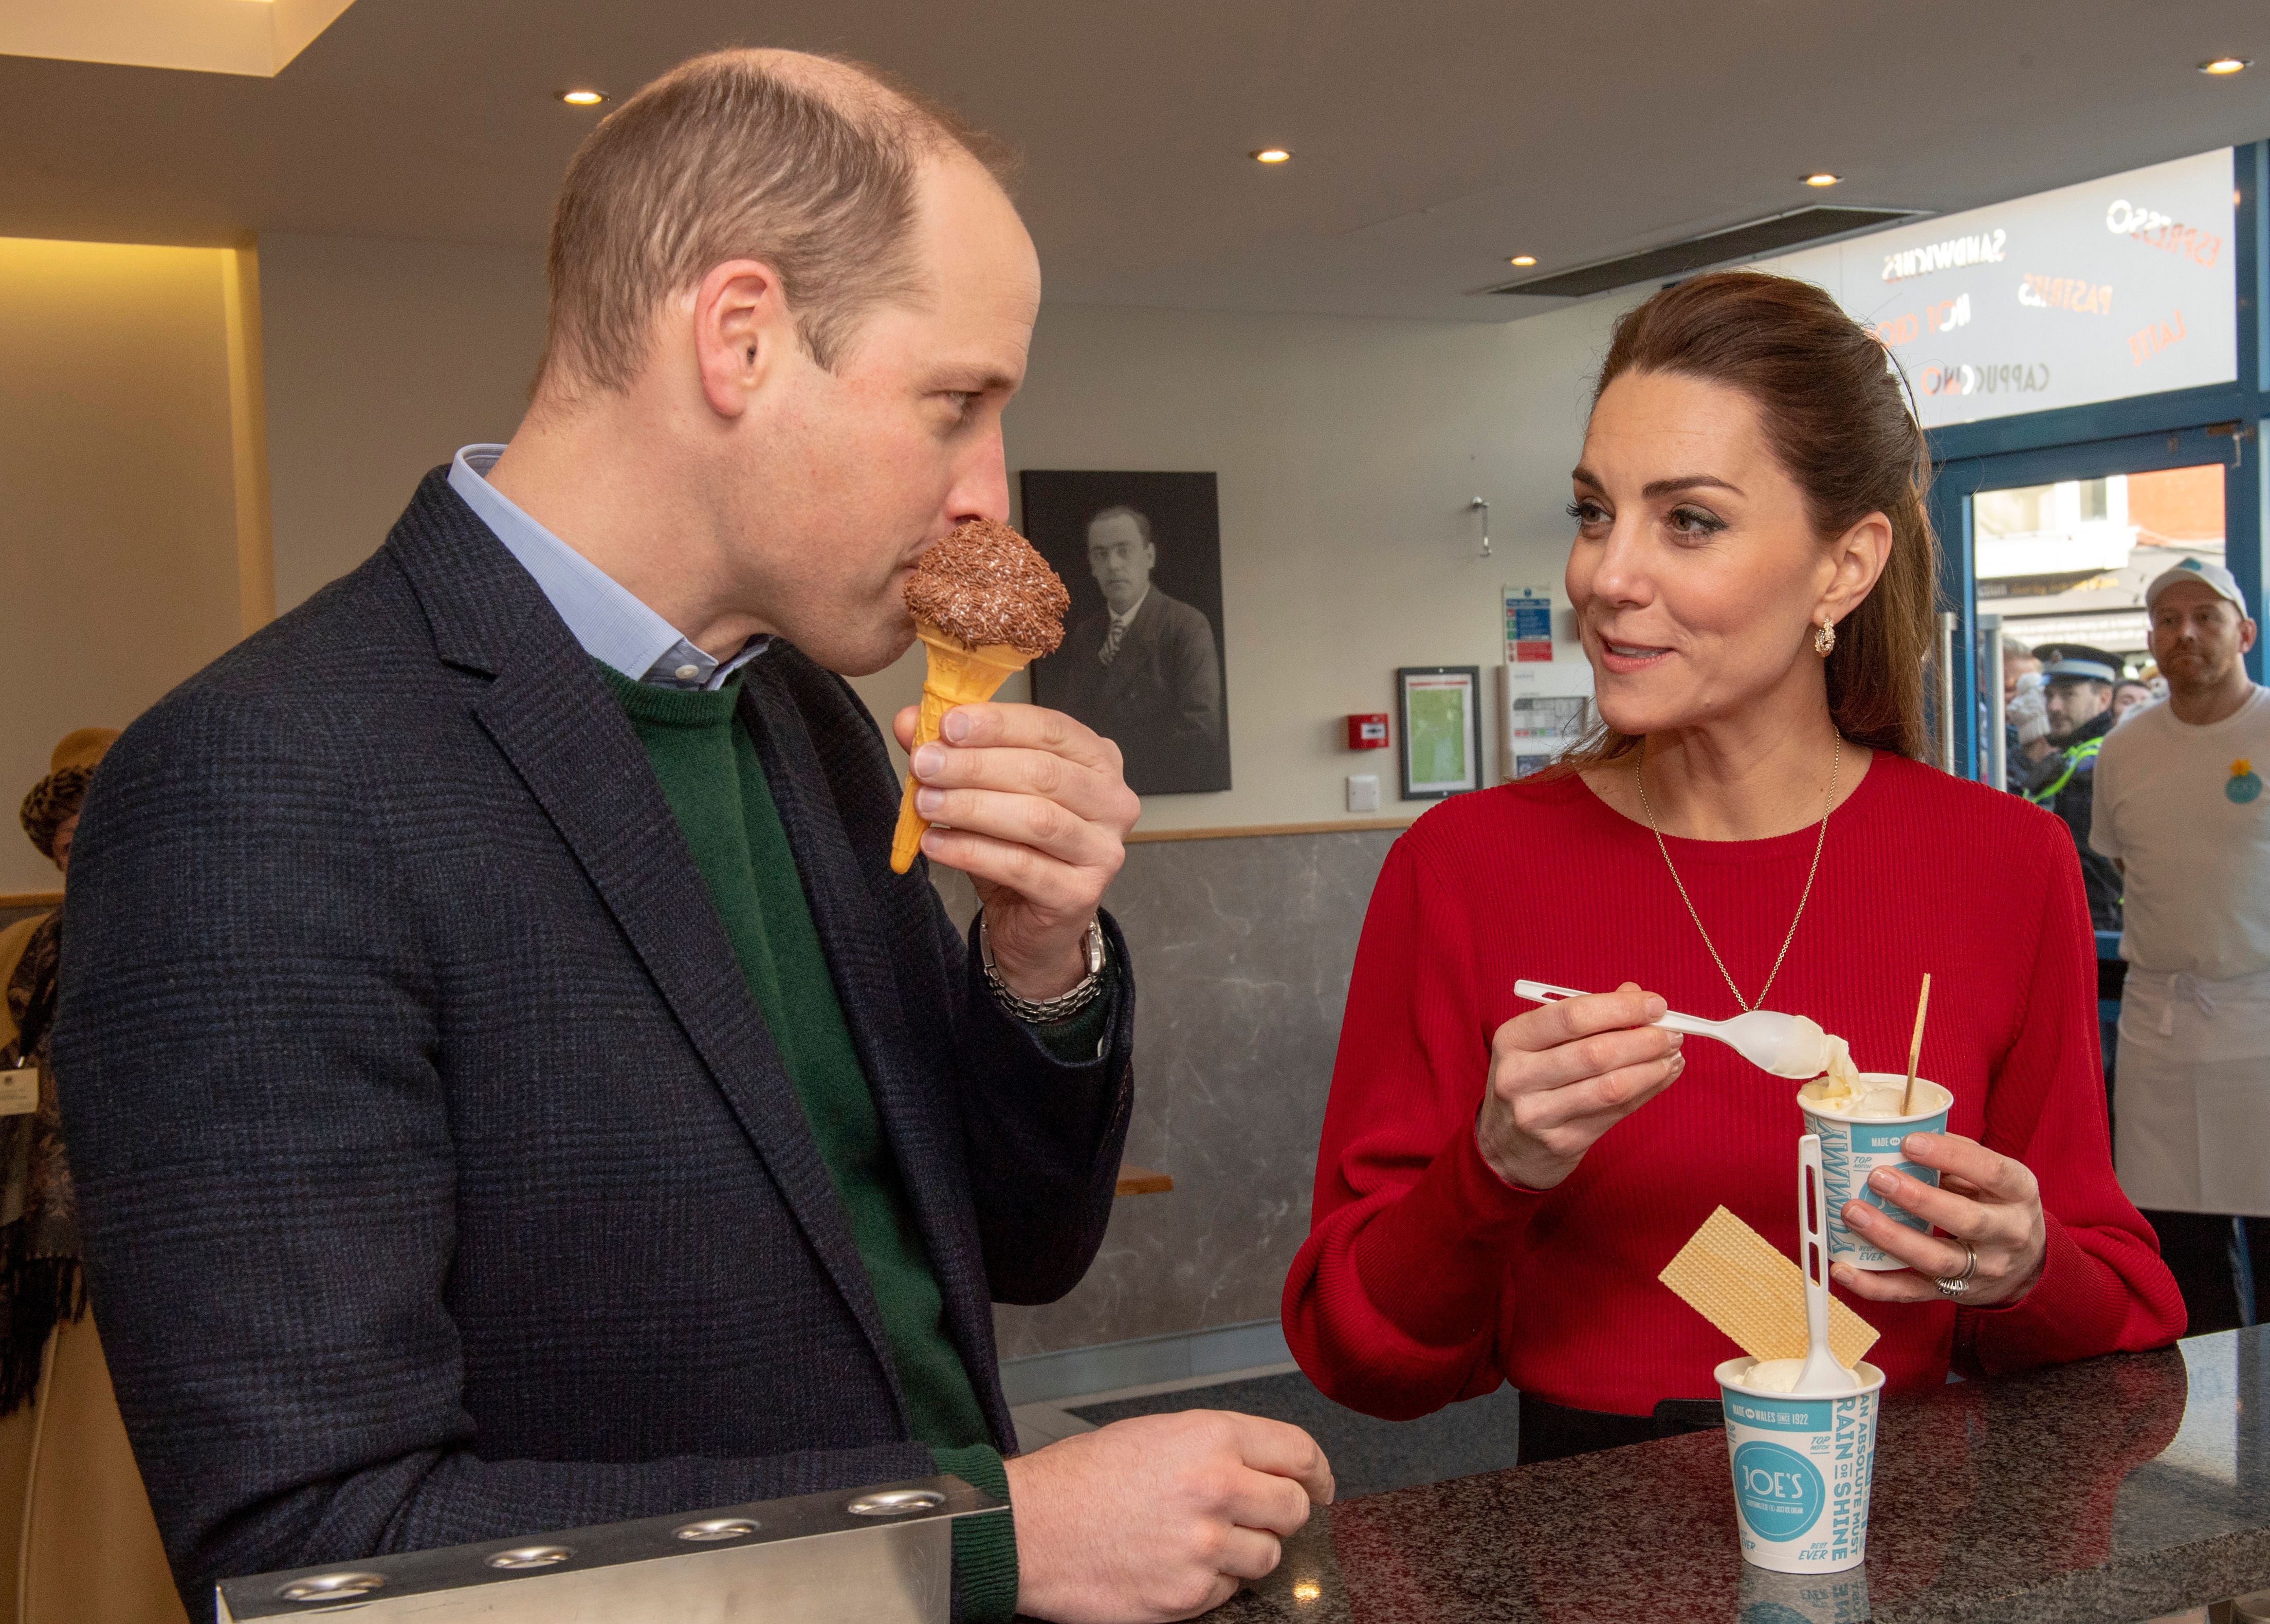 Prince William and Kate Middleton eat ice cream in Wales